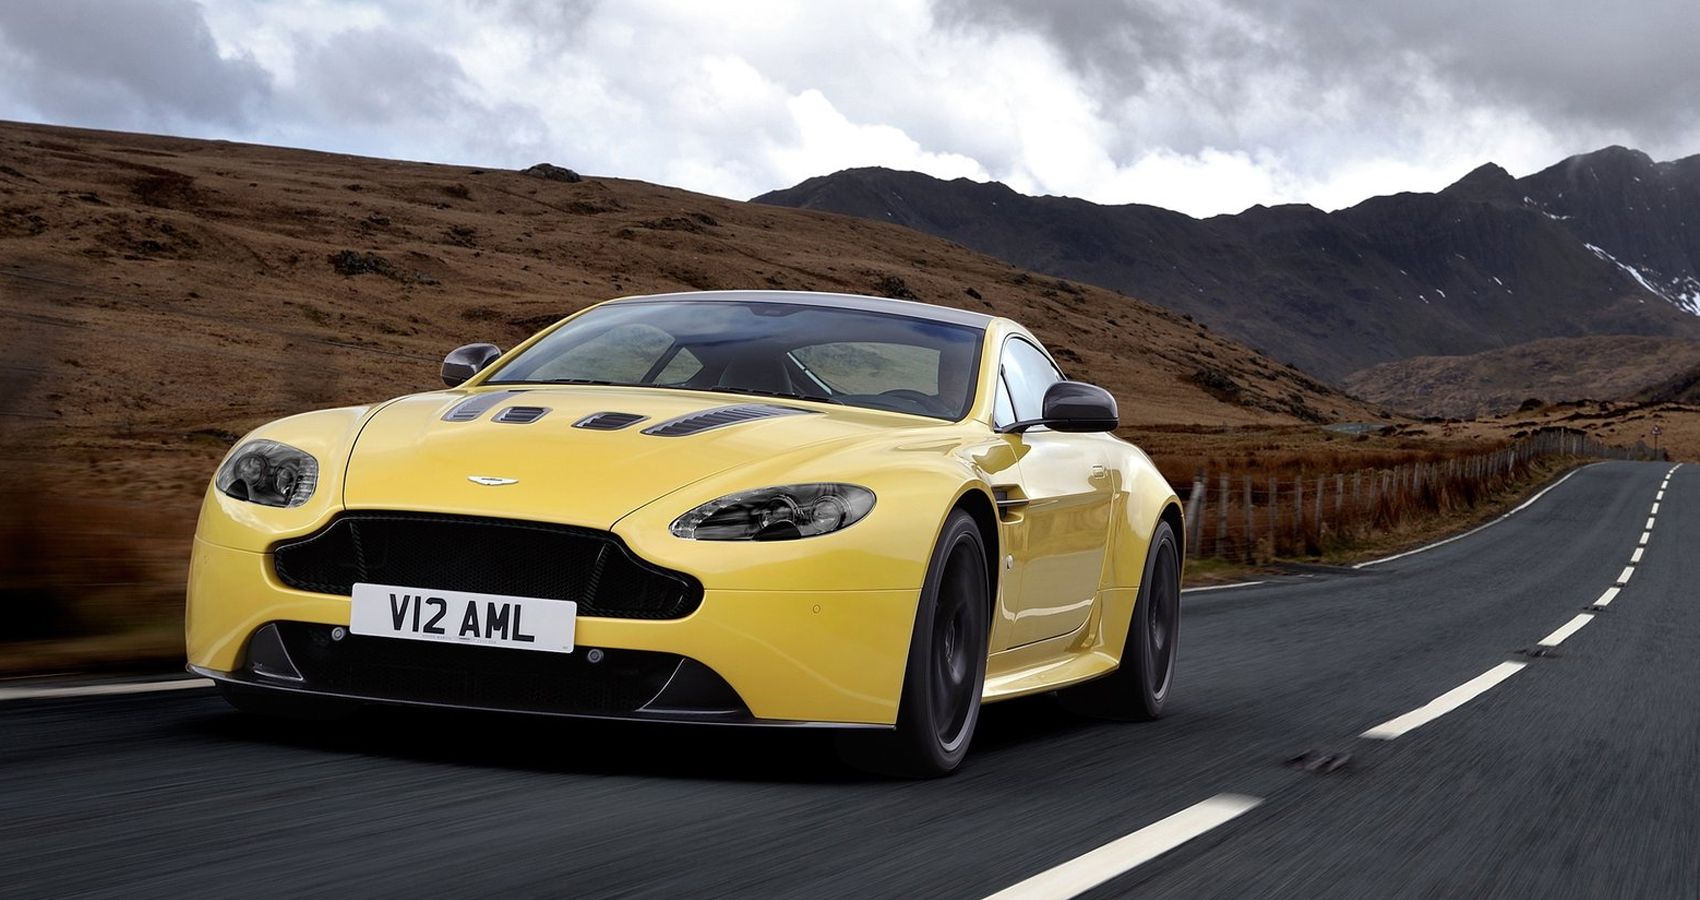 The front of a yellow V12 Vantage S on the move